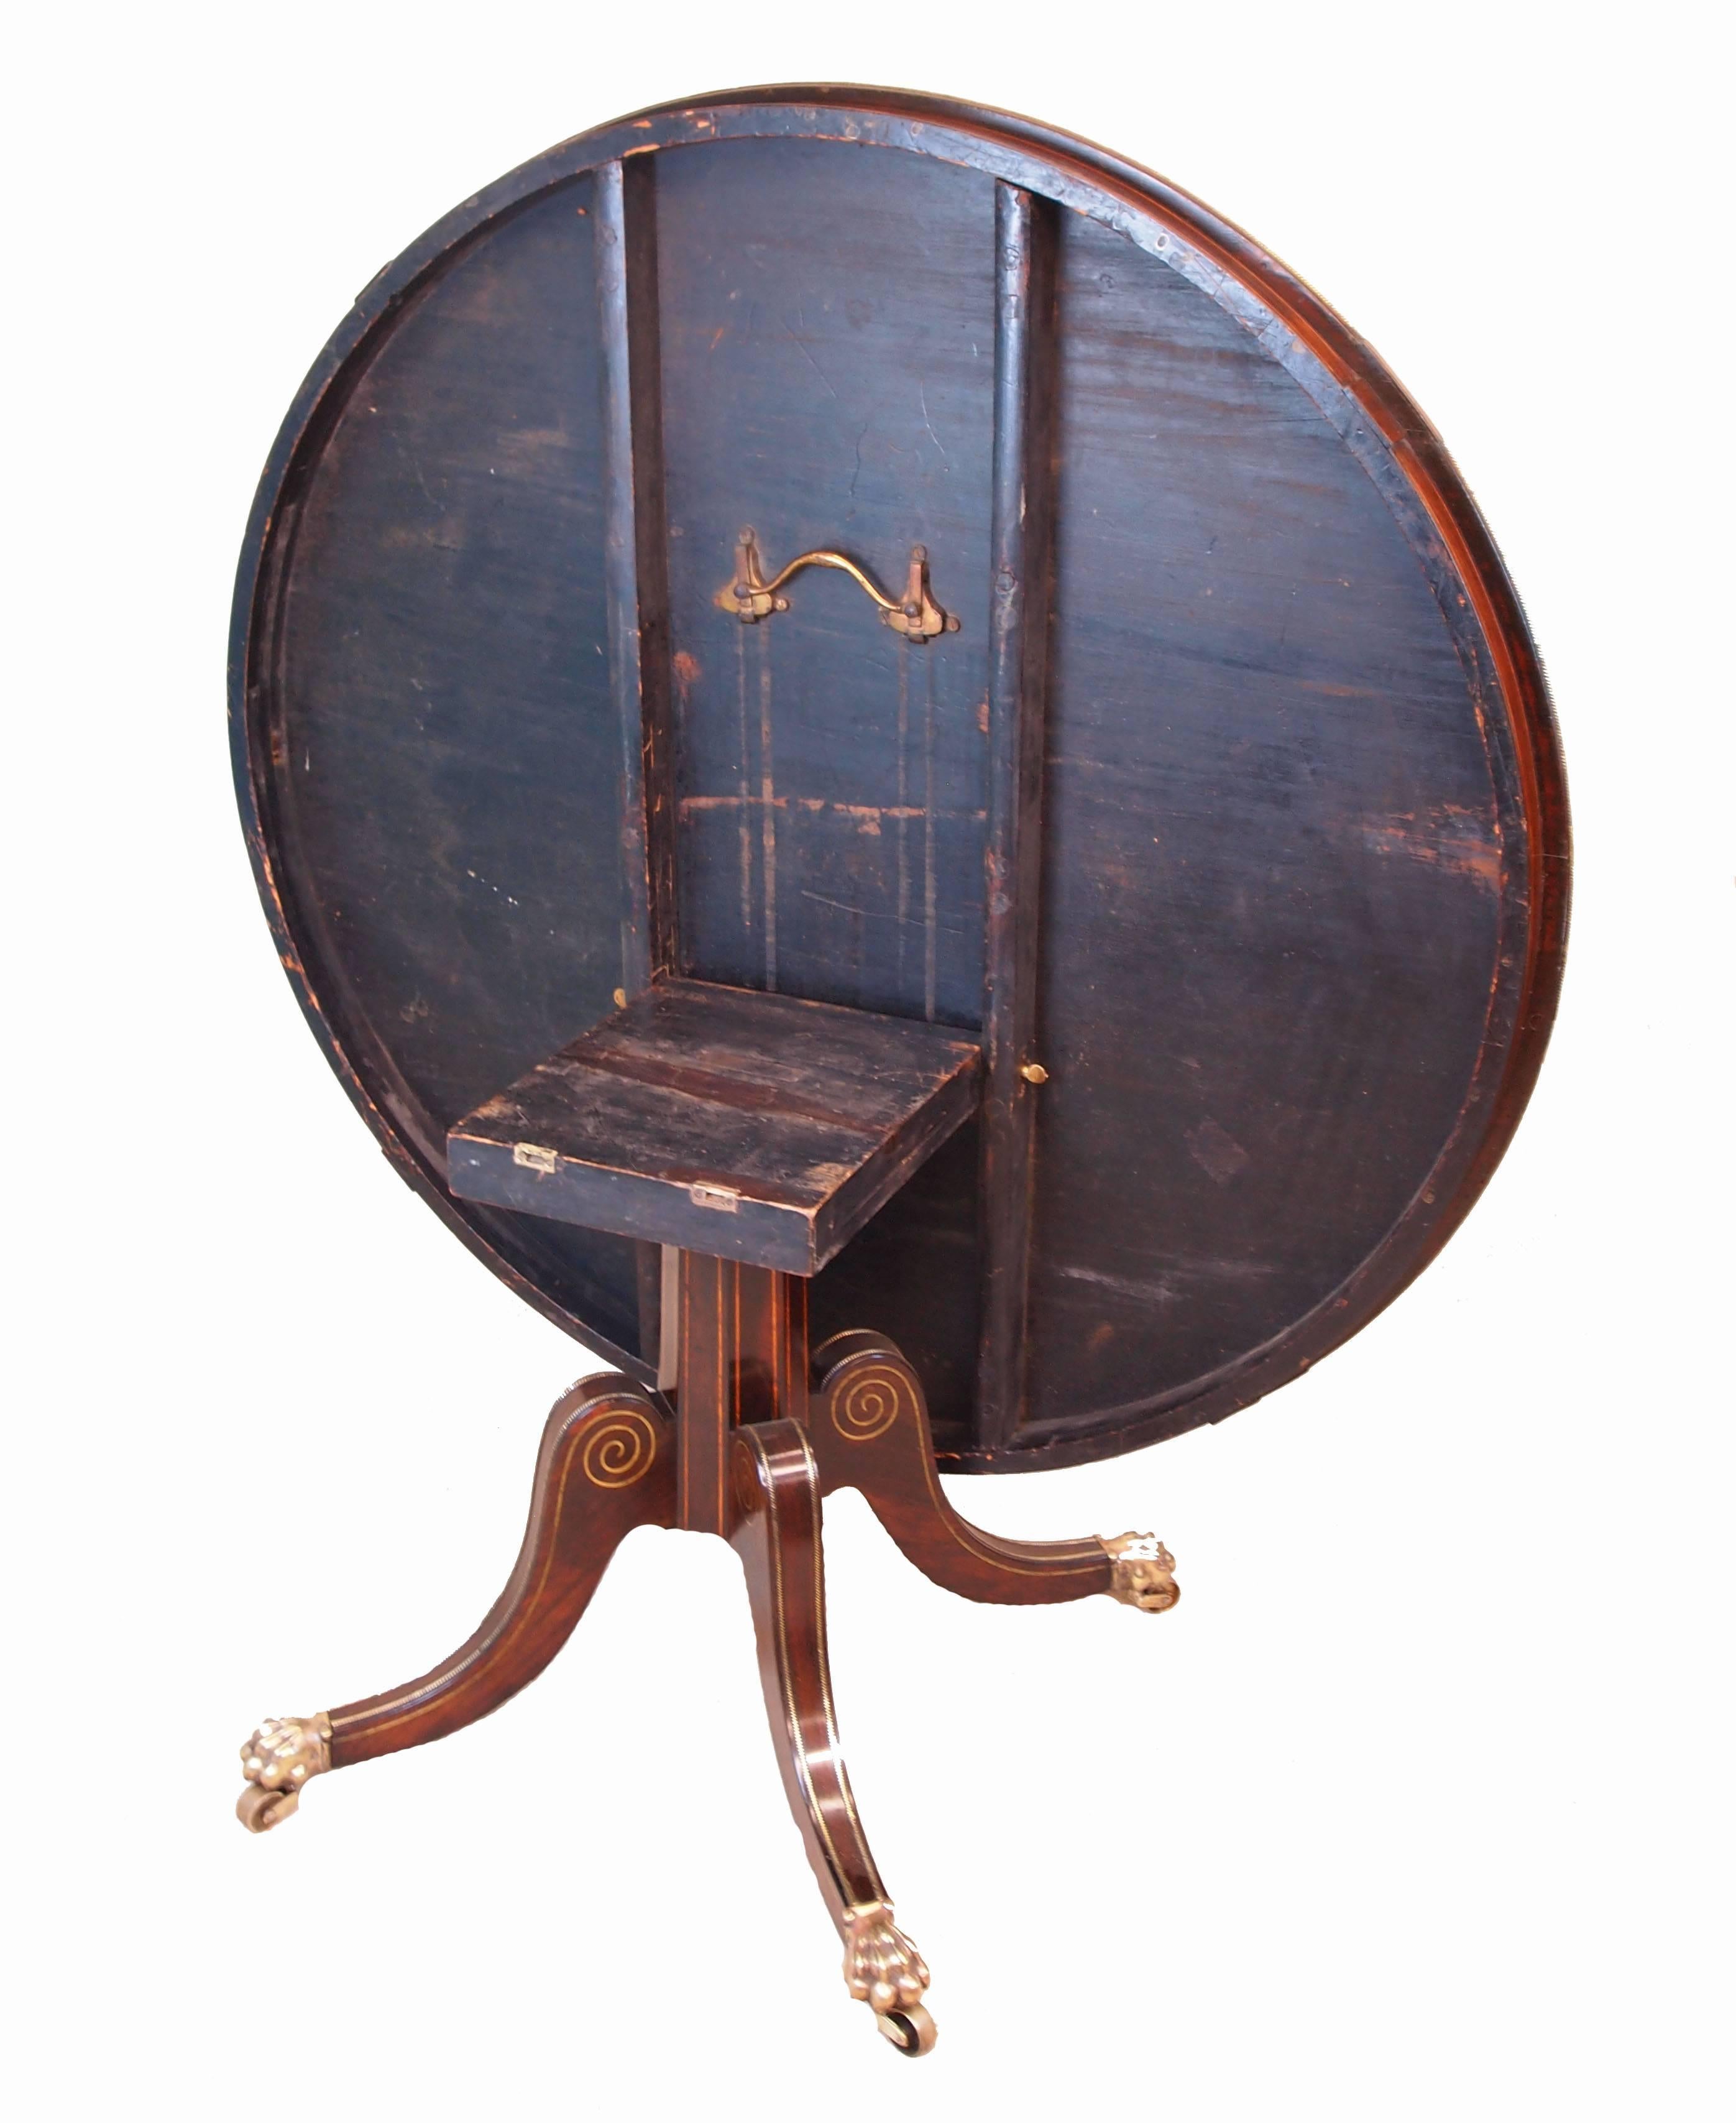 A superb quality Regency Period Indian rosewood breakfast, or centre, table
having superbly figured circular tilting top of good proportions with inlaid 
And brass moulded decoration raised on central support with four elegant
Scrolling sabre